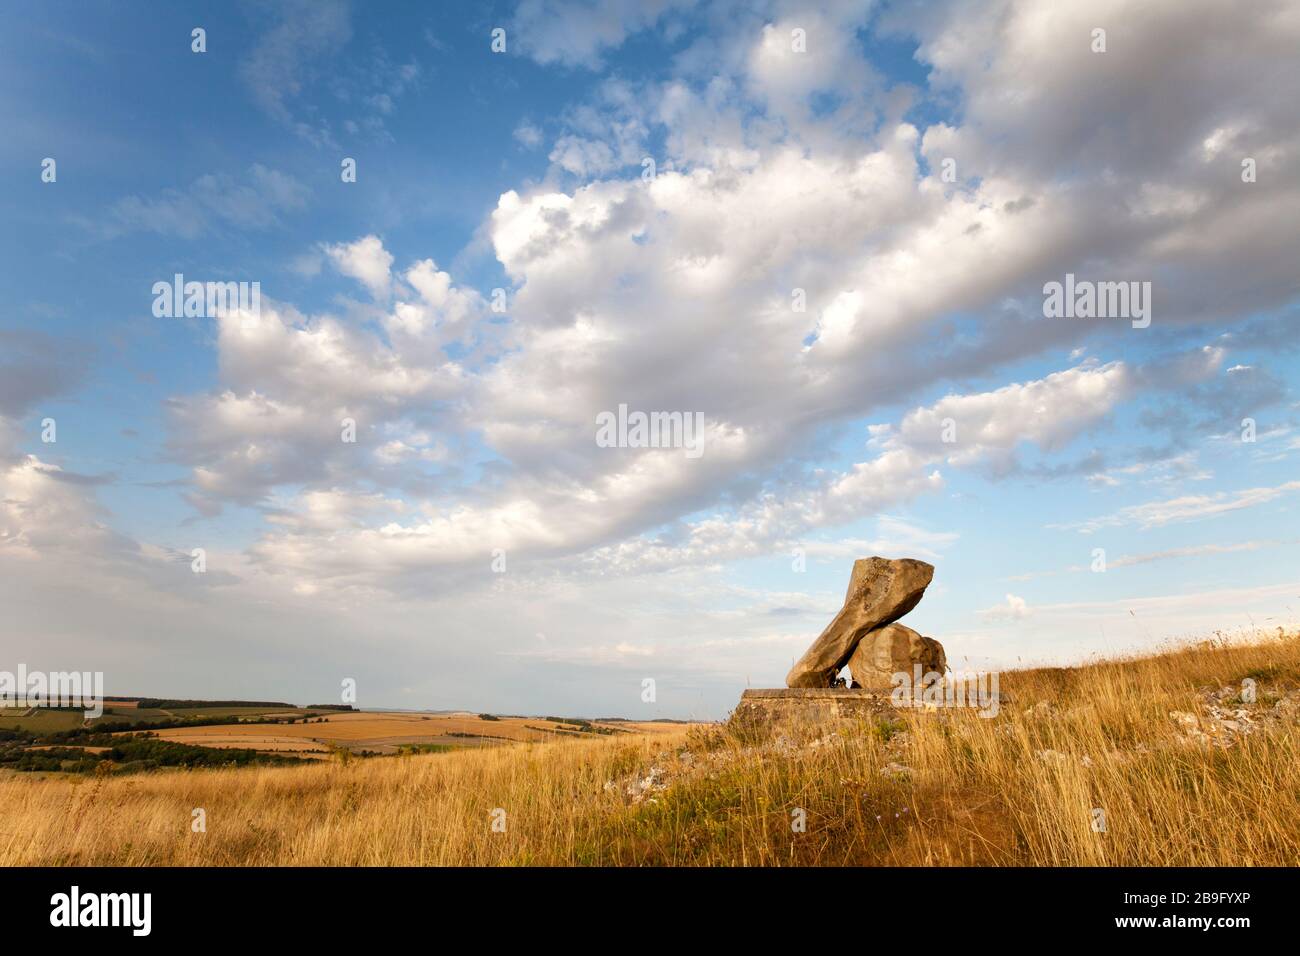 A memorial stone to the late Sir John Paskin on Ebsbury Hill, overlooking the Wylye Valley near the village of Great Wishford in Wiltshire. Stock Photo